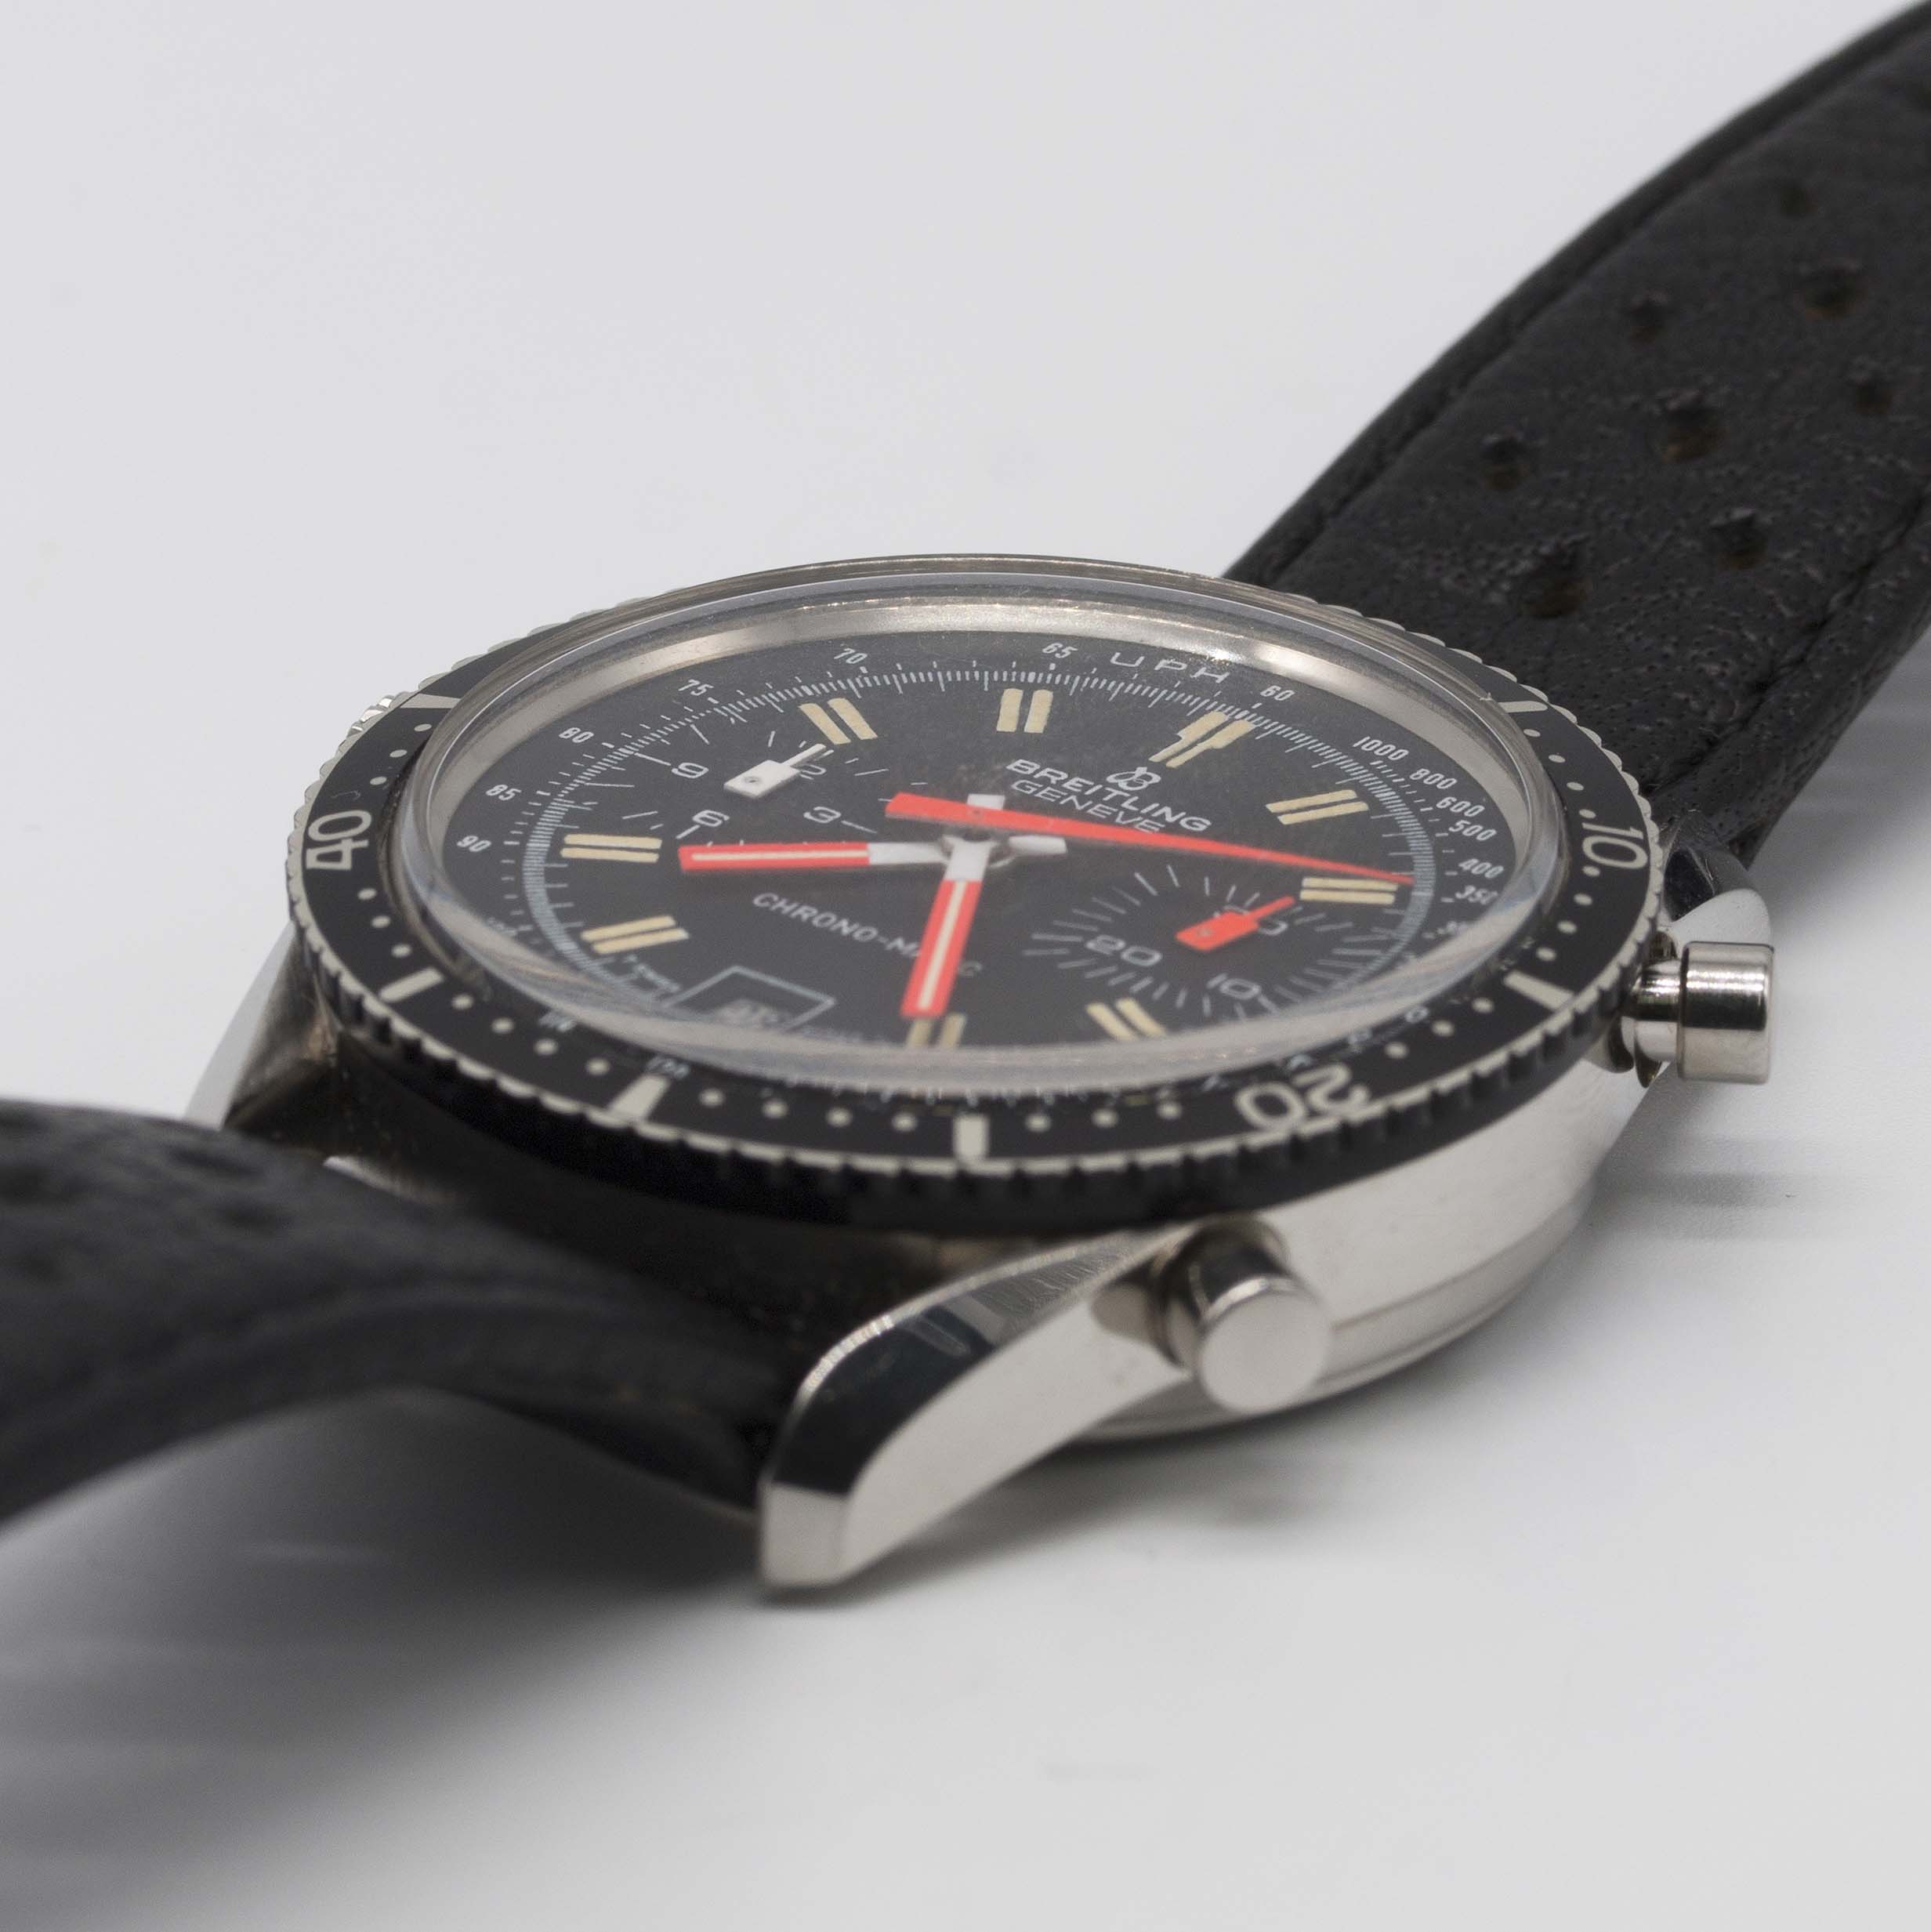 A RARE GENTLEMAN'S STAINLESS STEEL BREITLING CHRONO-MATIC CHRONOGRAPH WRIST WATCH CIRCA 1977, REF. - Image 4 of 12